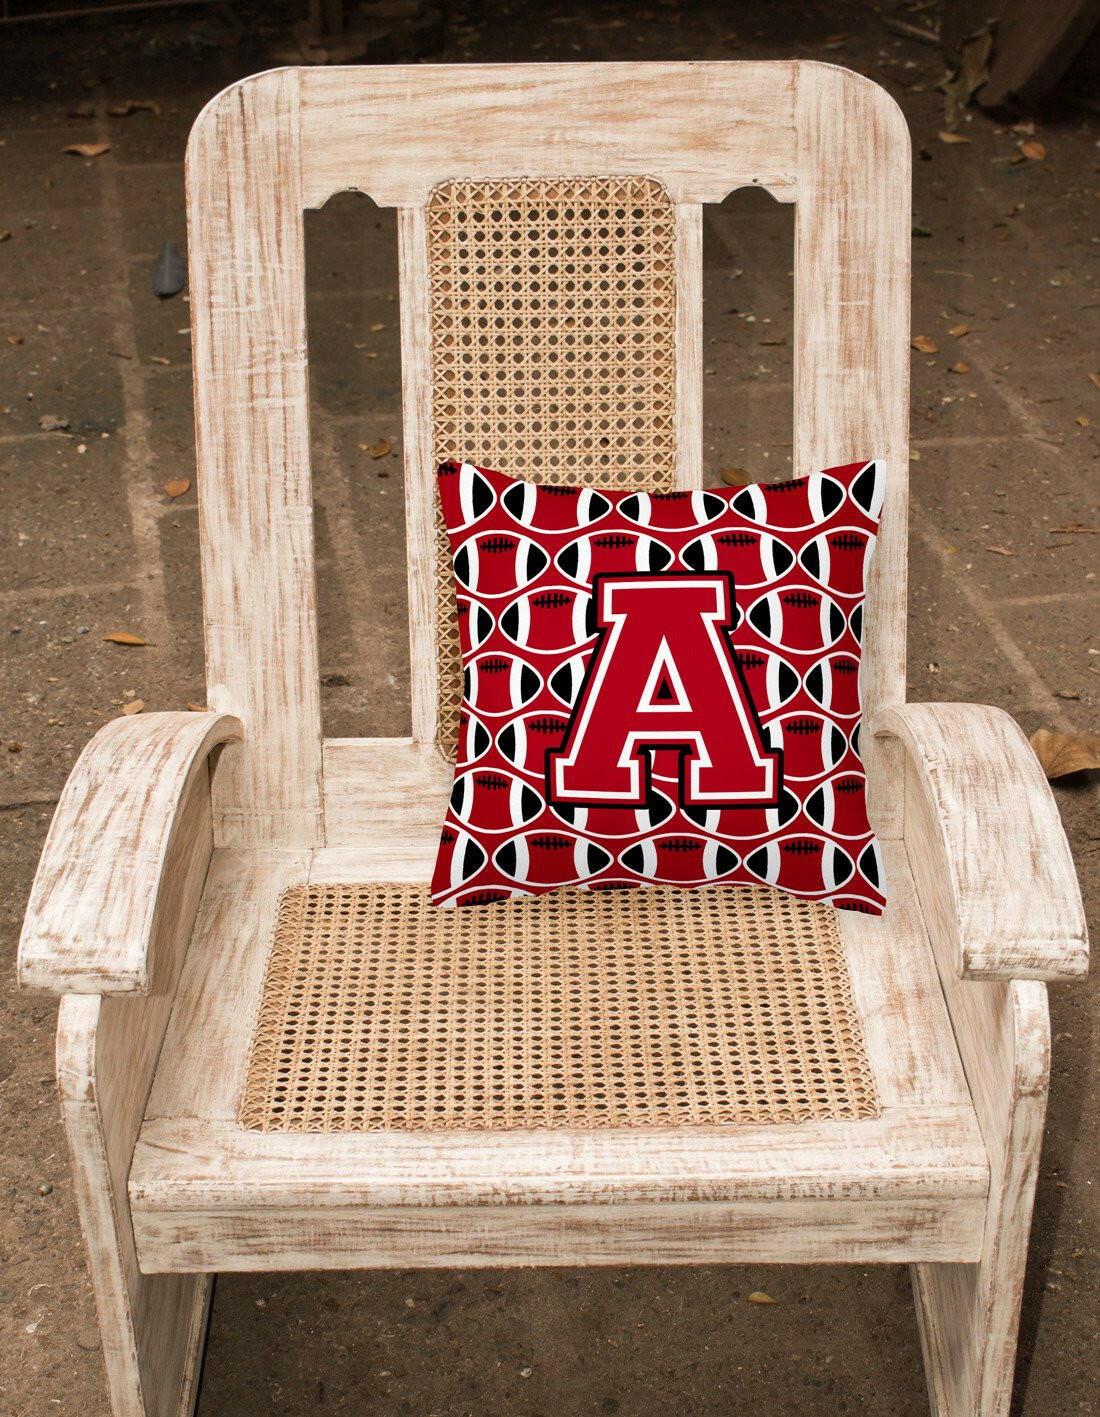 Letter A Football Red, Black and White Fabric Decorative Pillow CJ1073-APW1414 by Caroline's Treasures